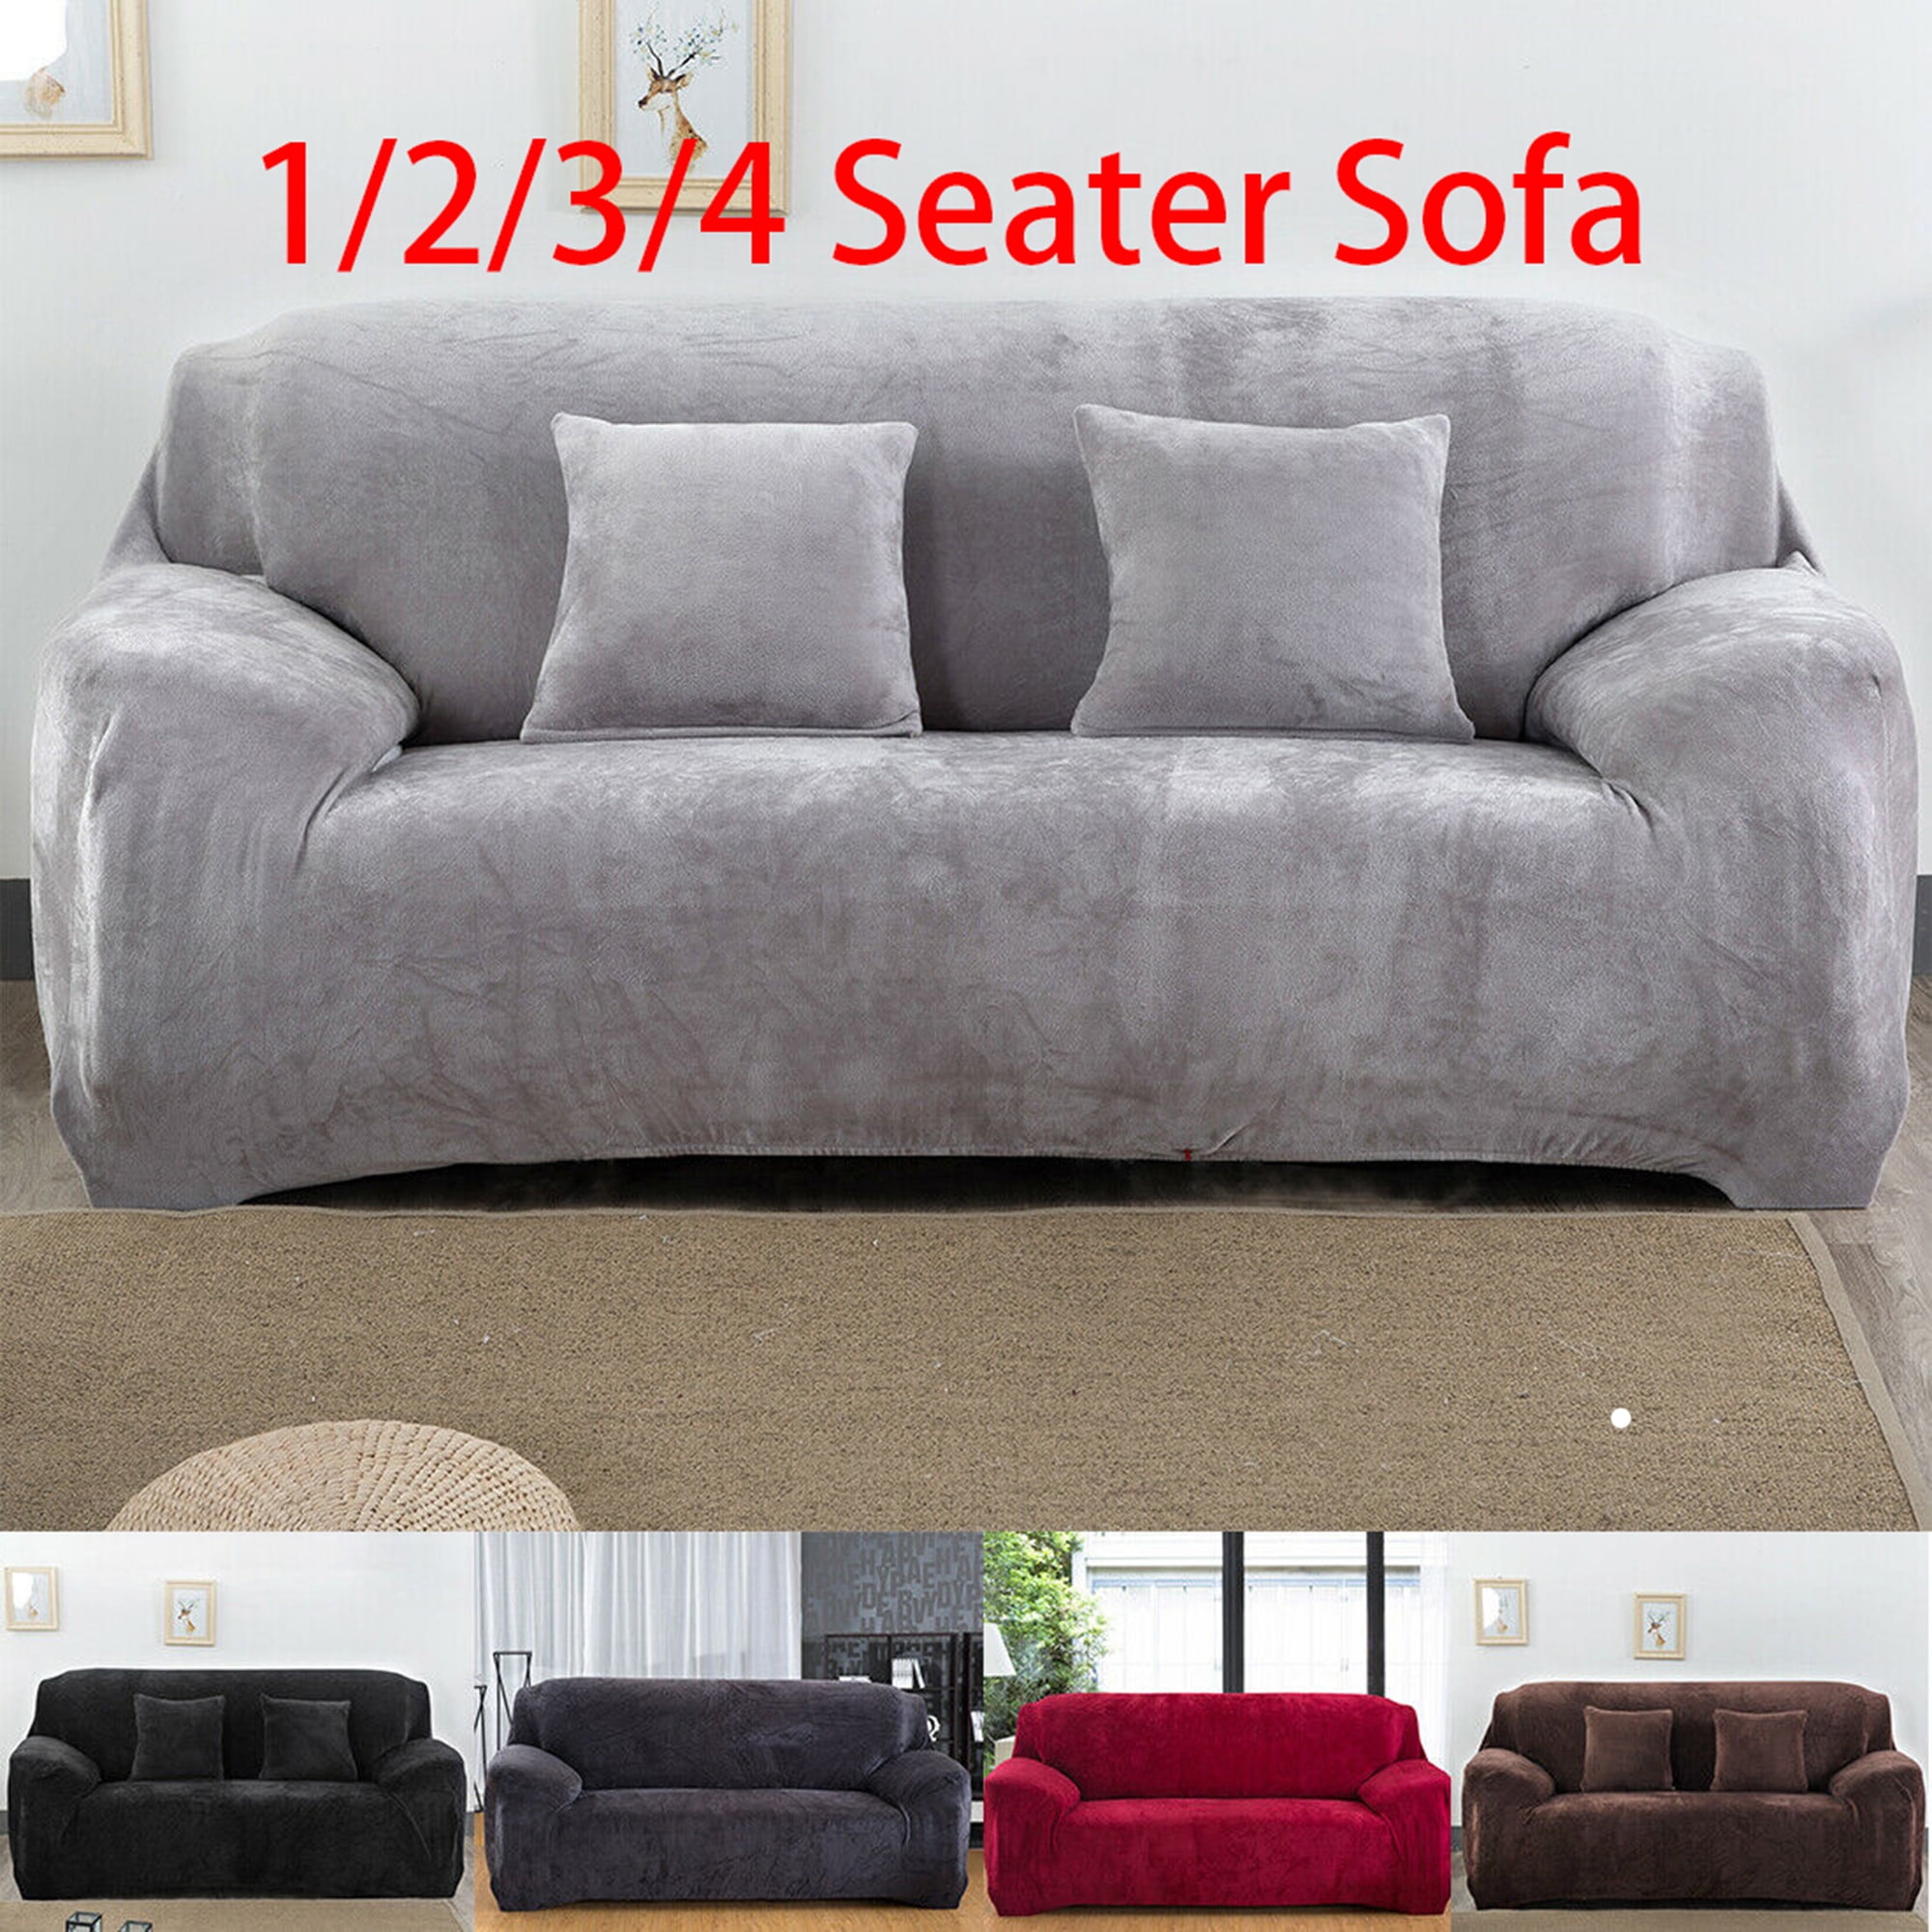 Details about   Ultra Thick Velvet Elastic STRETCH SOFA COVERS Slipcover Protector 1/2/3/4Seater 